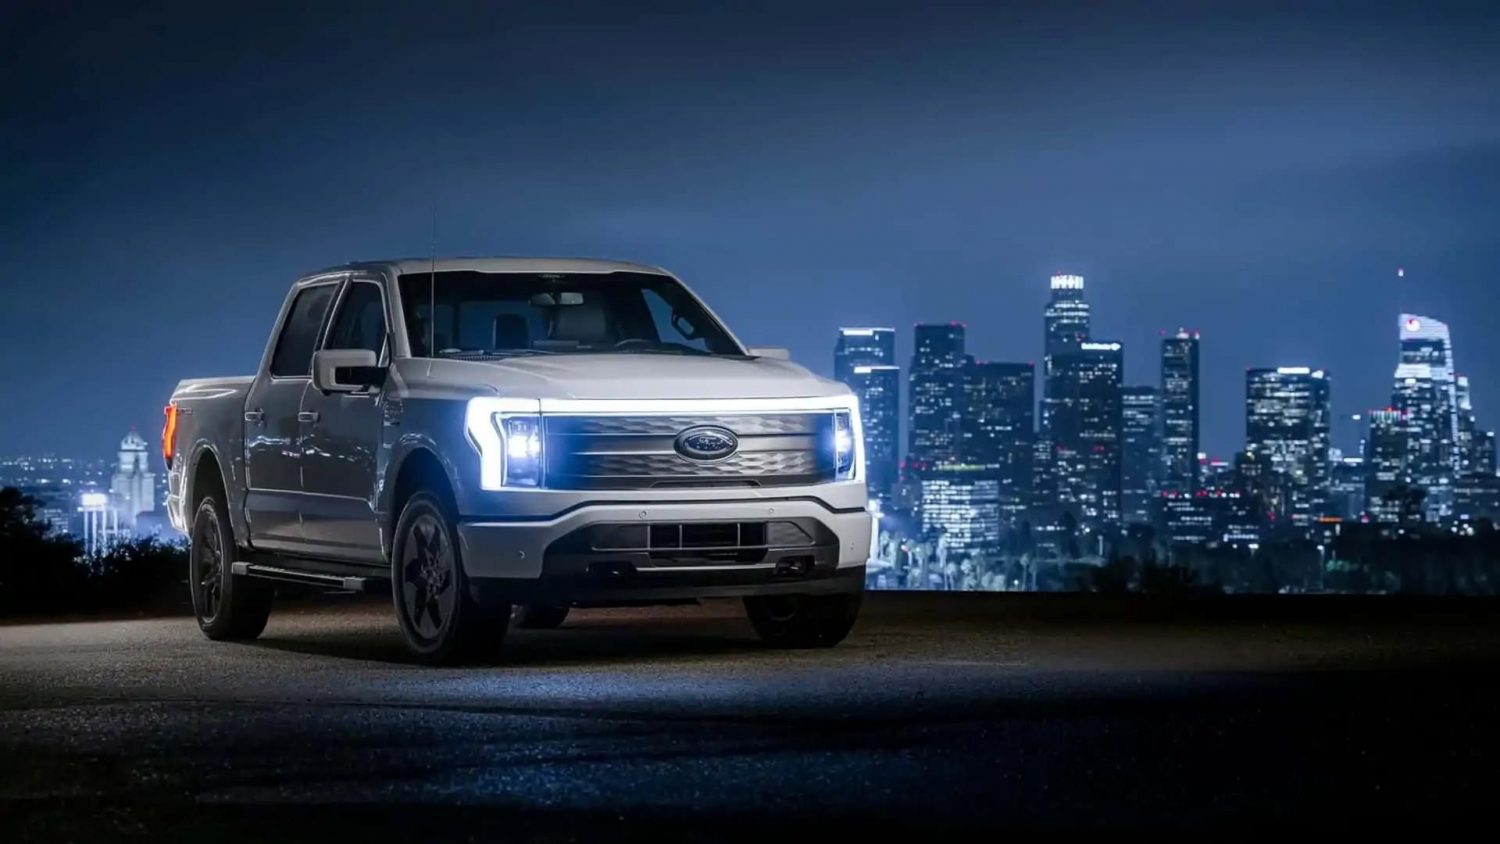 Ford is launching a new F-150 Lightning model called the F-150 Lightning Flash, a technologically advanced vehicle that includes most of the features that current customers love and costs less than $70,000.